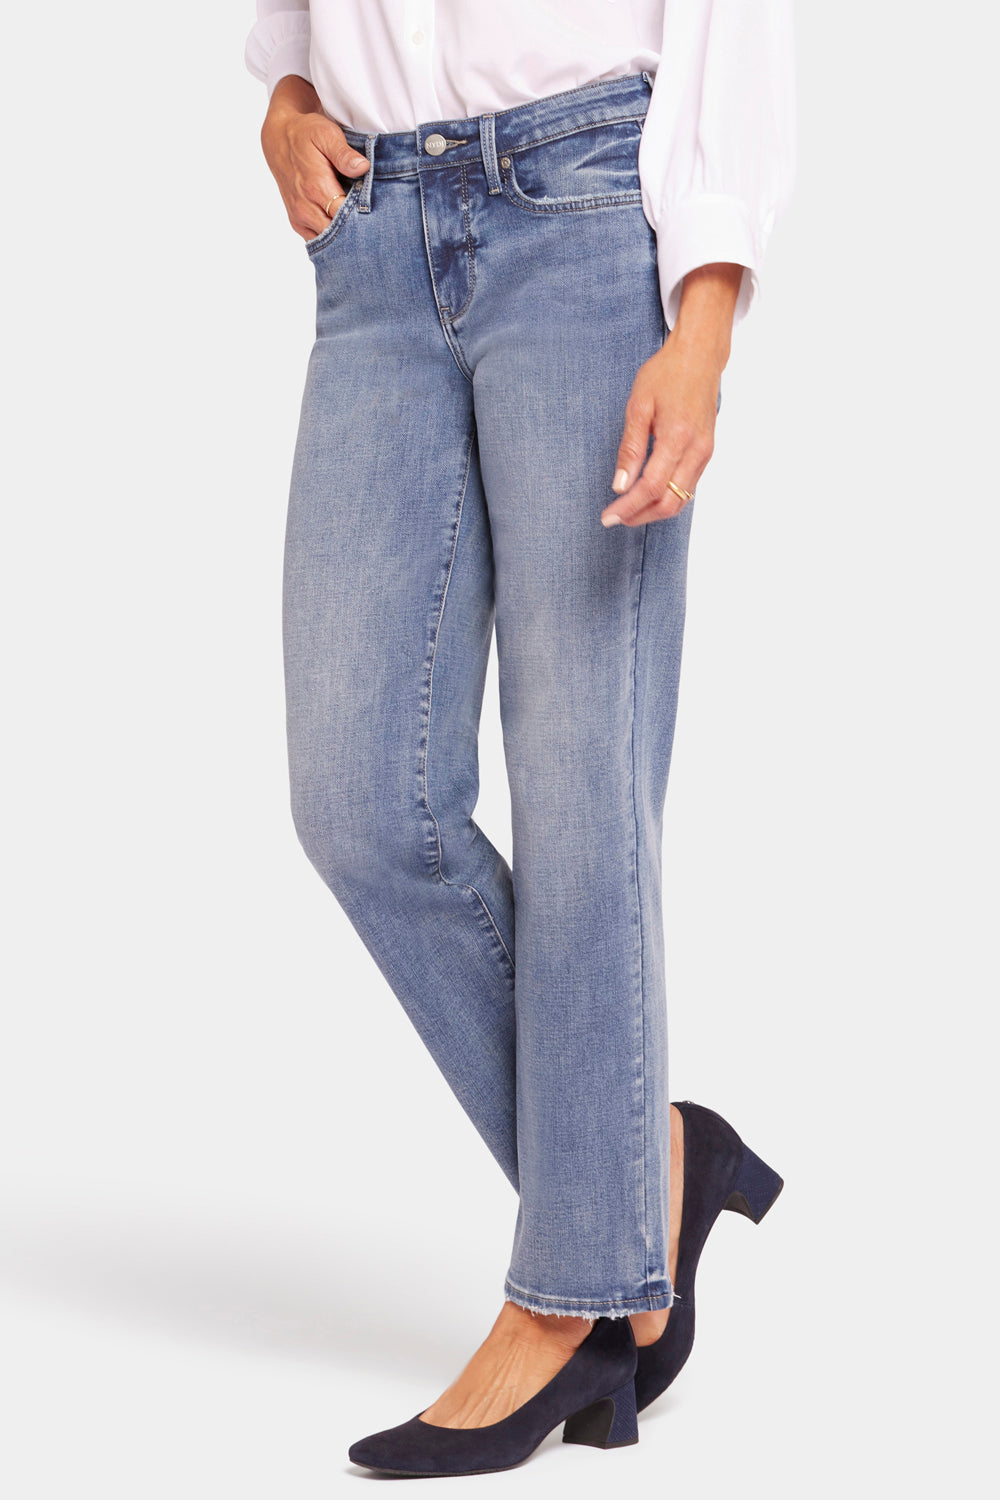 NYDJ Relaxed Slender Jeans In Petite  - Romance